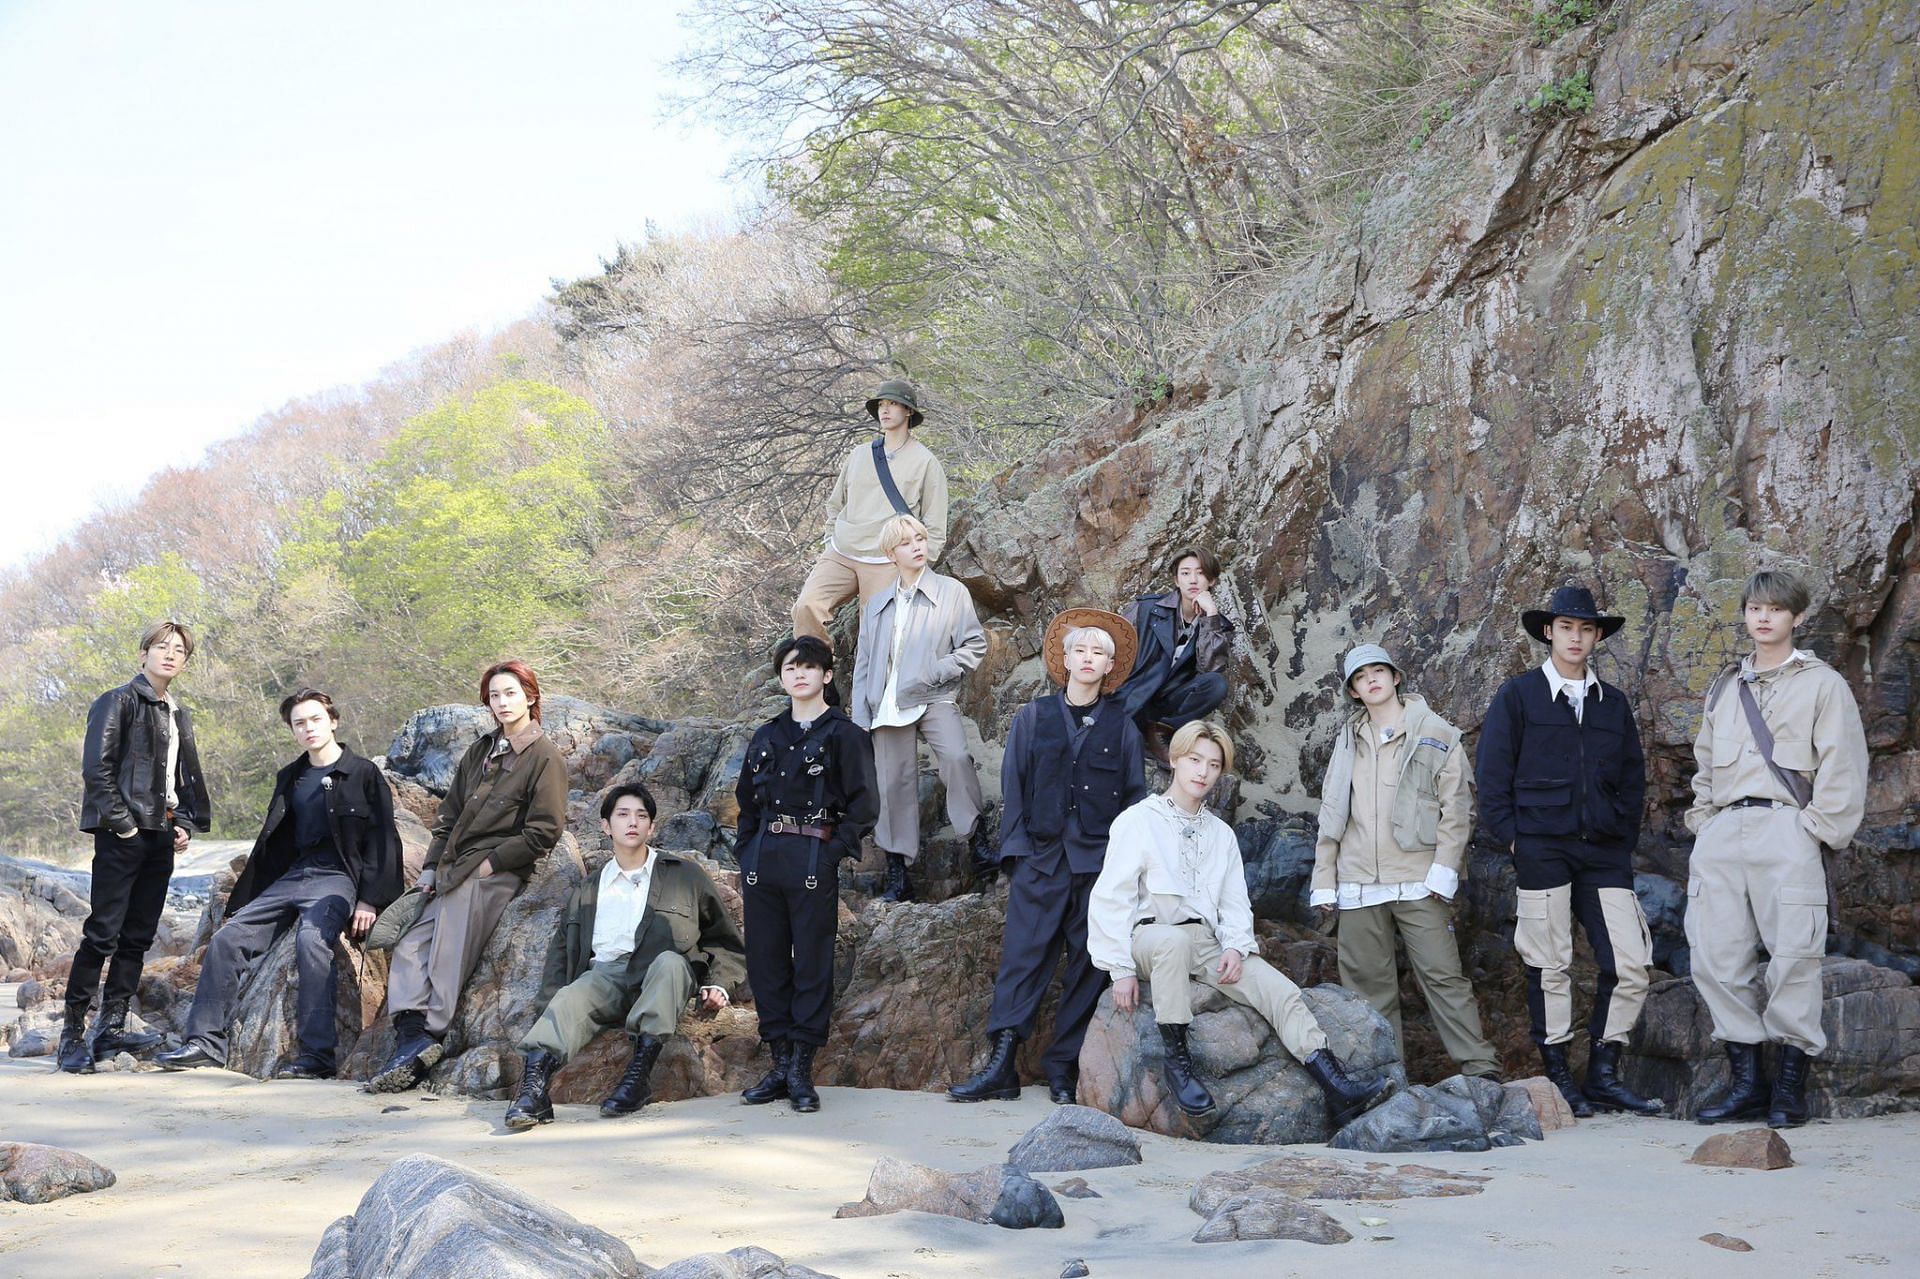 The GOING SEVENTEEN cast members pose for an episode based on an island. (Image via Twitter/ @carat1713_)